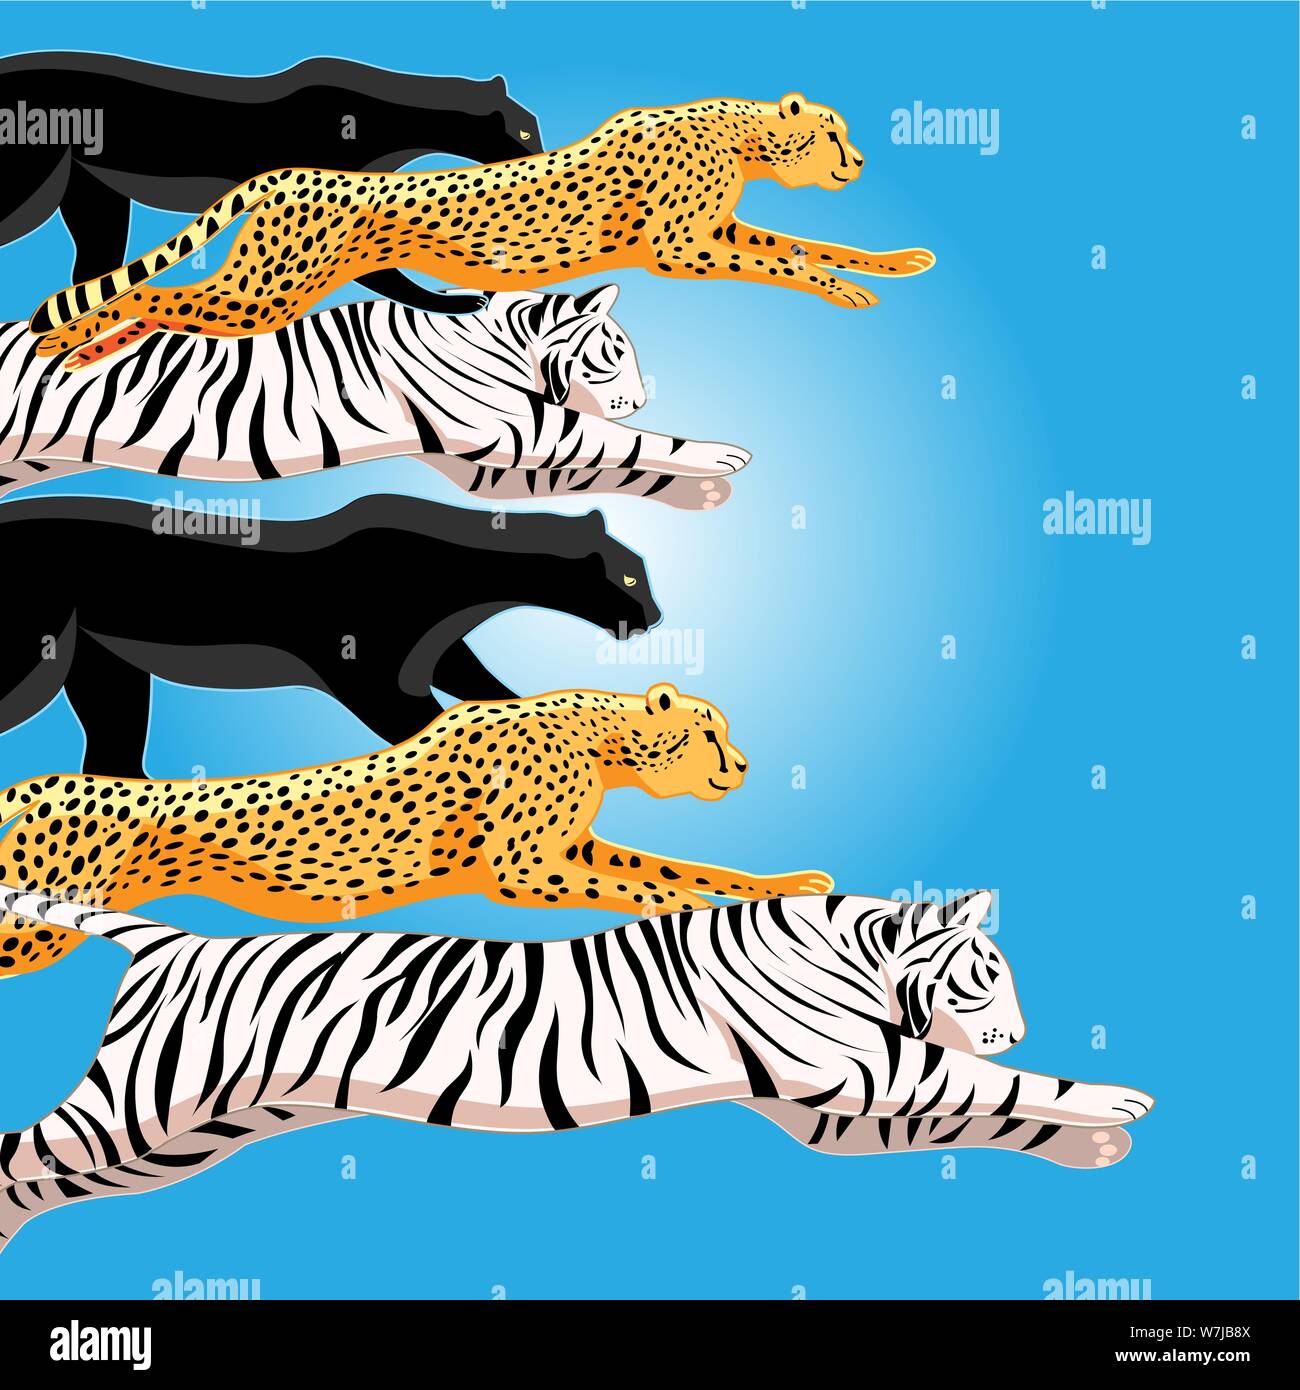 jungle on for page Art sun. with a a Vector An Image the Alamy llustration Stock poster panthers, of leopards background pattern and & or - web example tigers